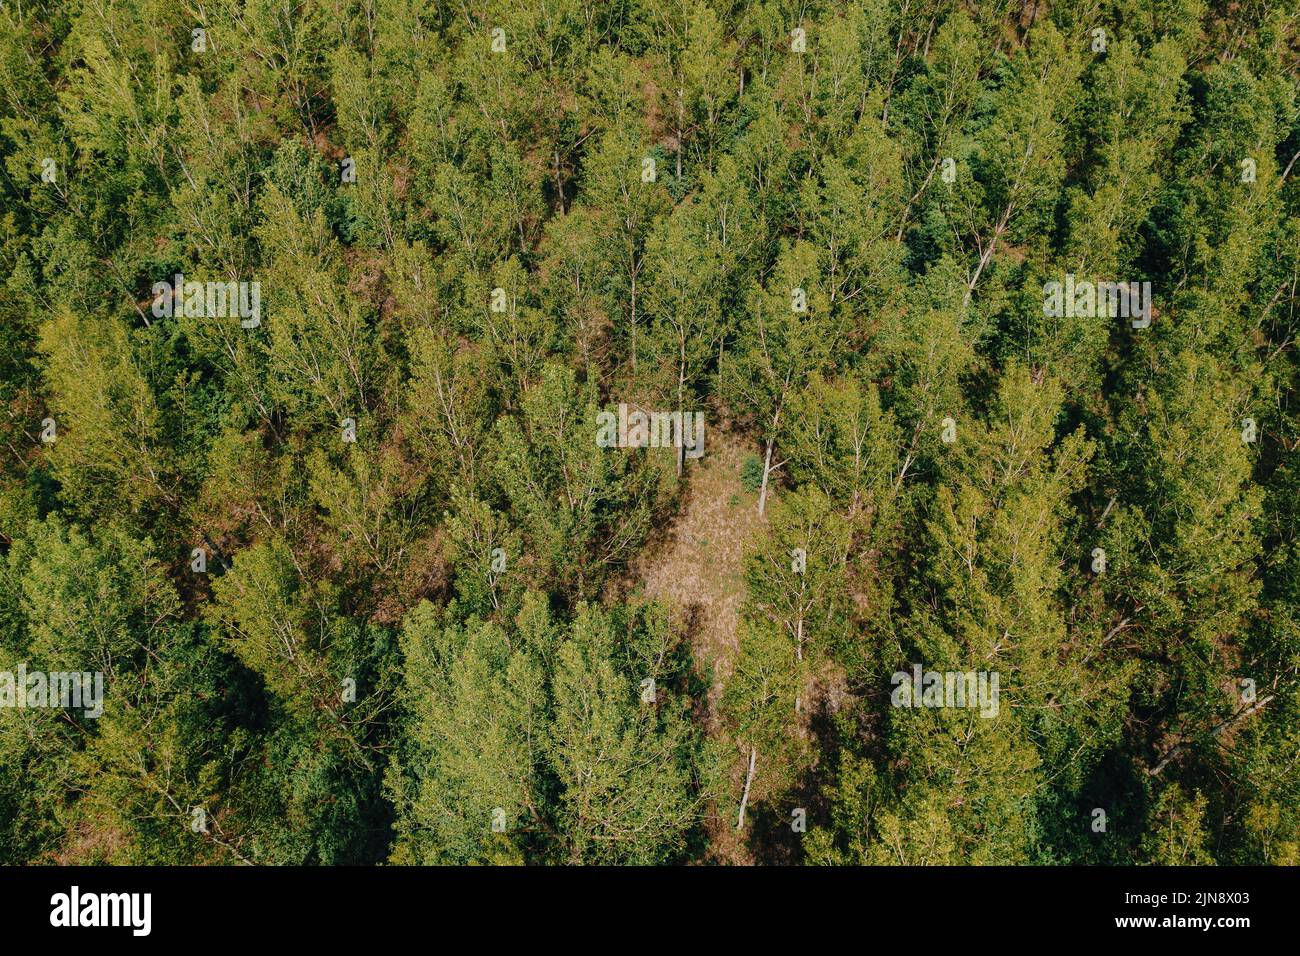 Deciduous cottonwood tree forest landscape from above, drone pov photography of treetops swaying in wind Stock Photo